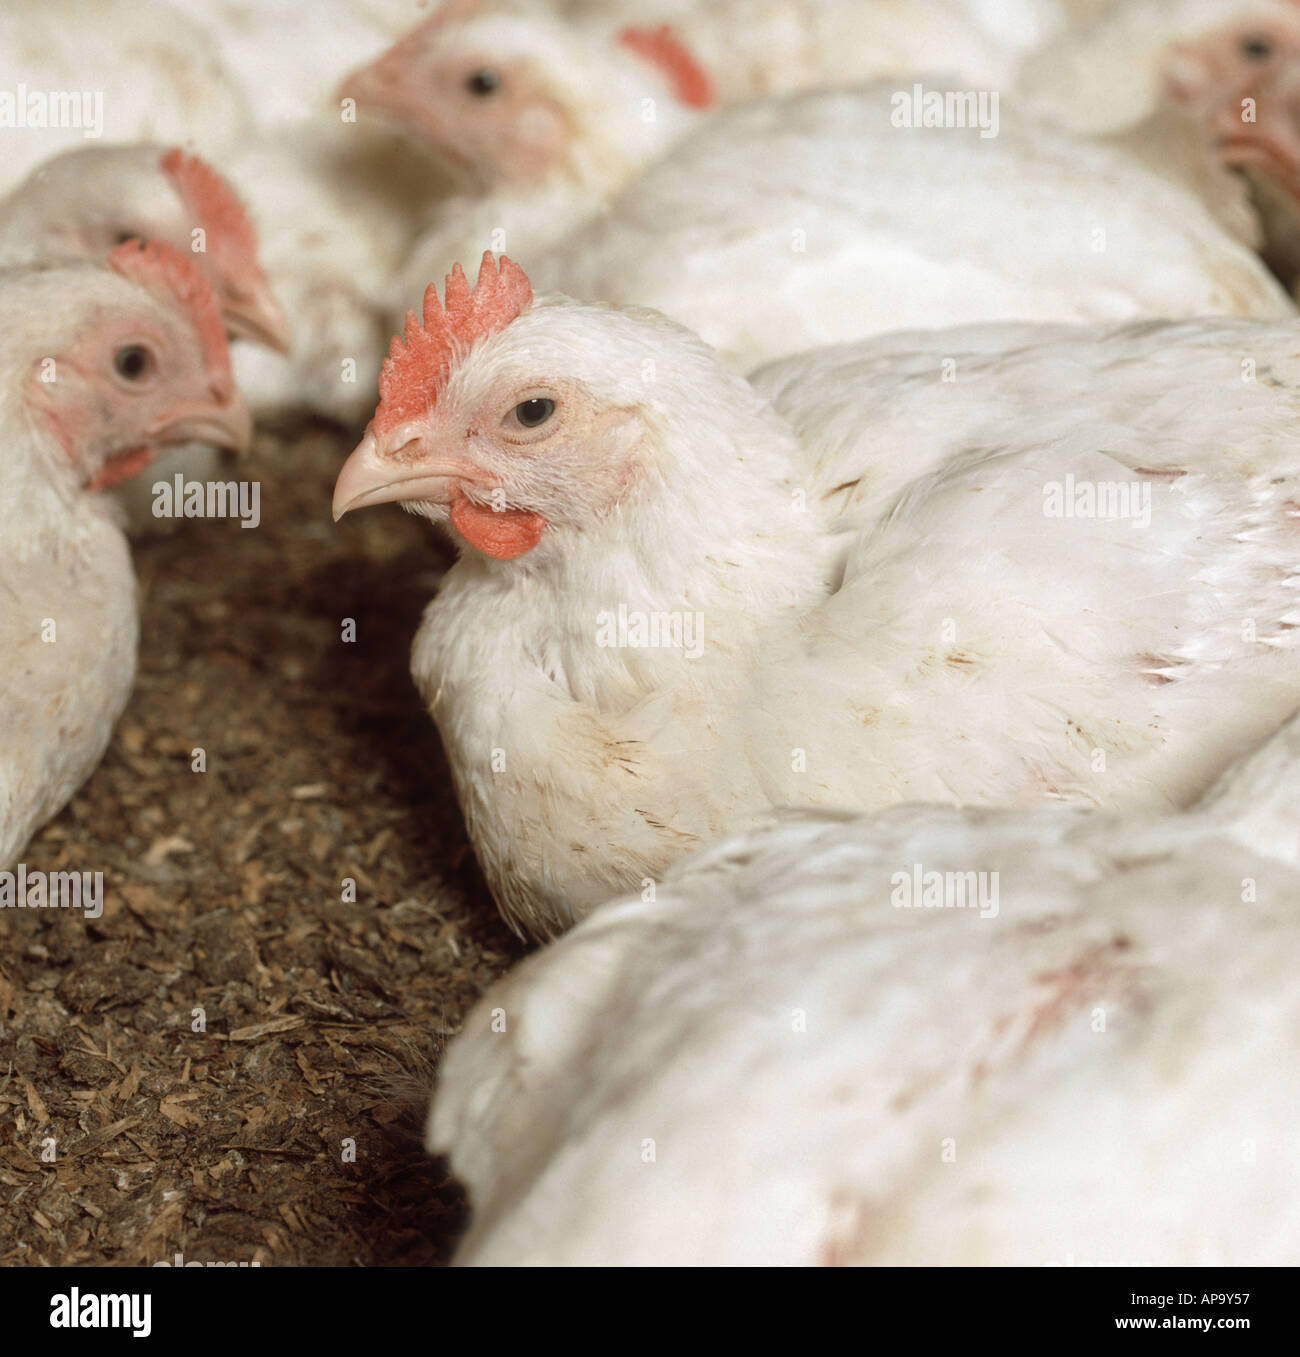 White broiler meat chicken Stock Photo